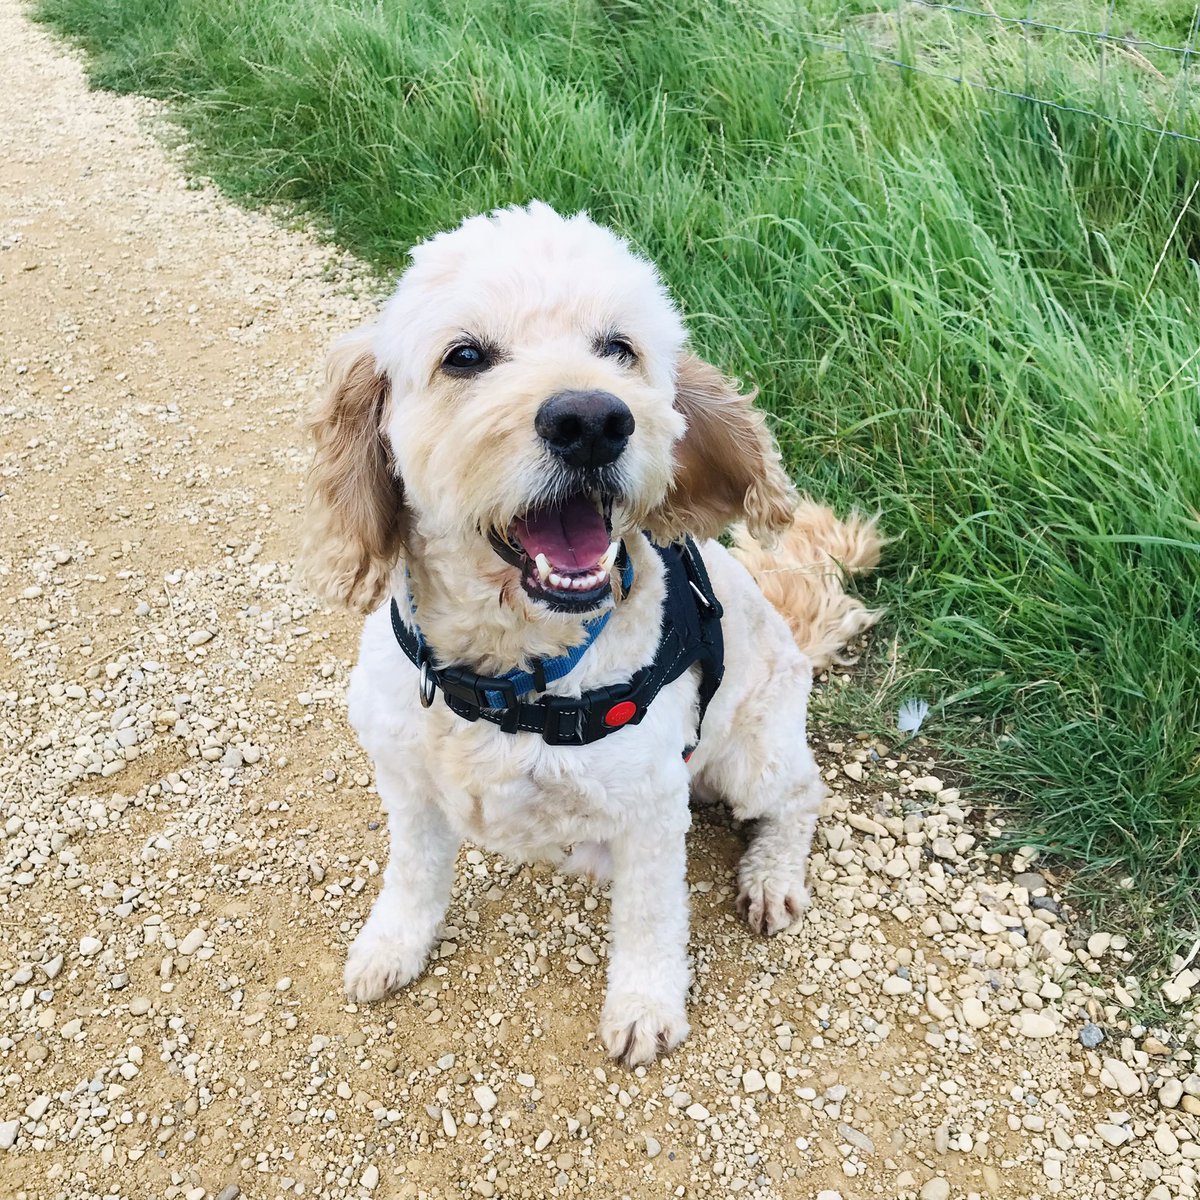 Enjoying a windy walk with this happy chap after a busy shift today! 🐶 🐾 #Cockapoo #JustWhatINeeded